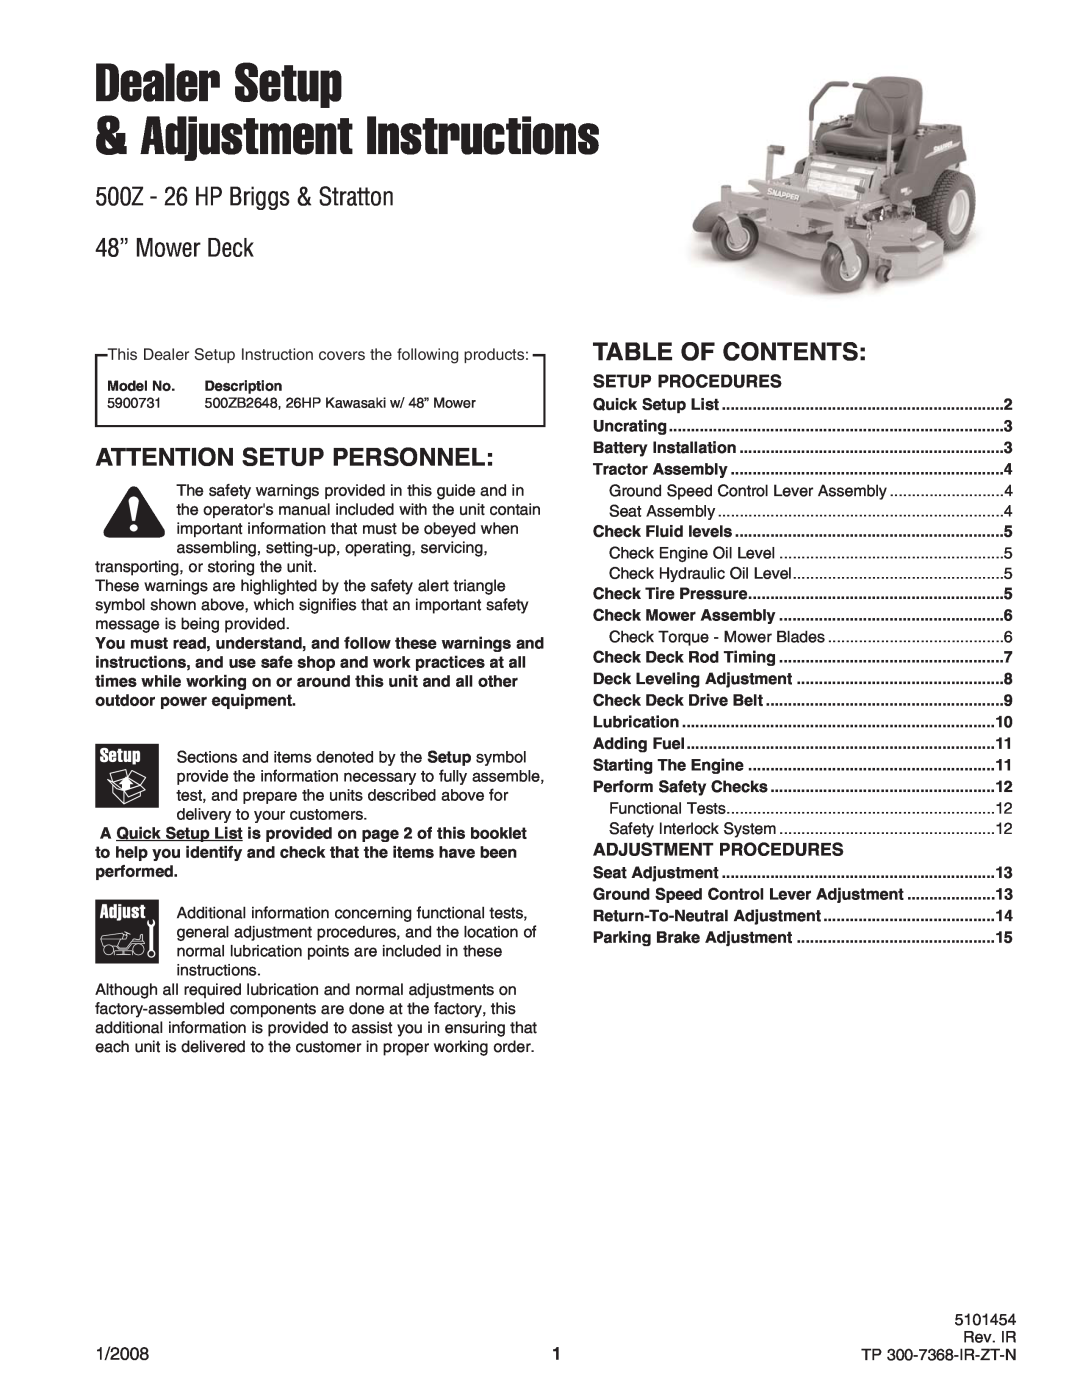 Briggs & Stratton 500Z - 26 manual Attention Setup Personnel, Table Of Contents, Dealer Setup Adjustment Instructions 